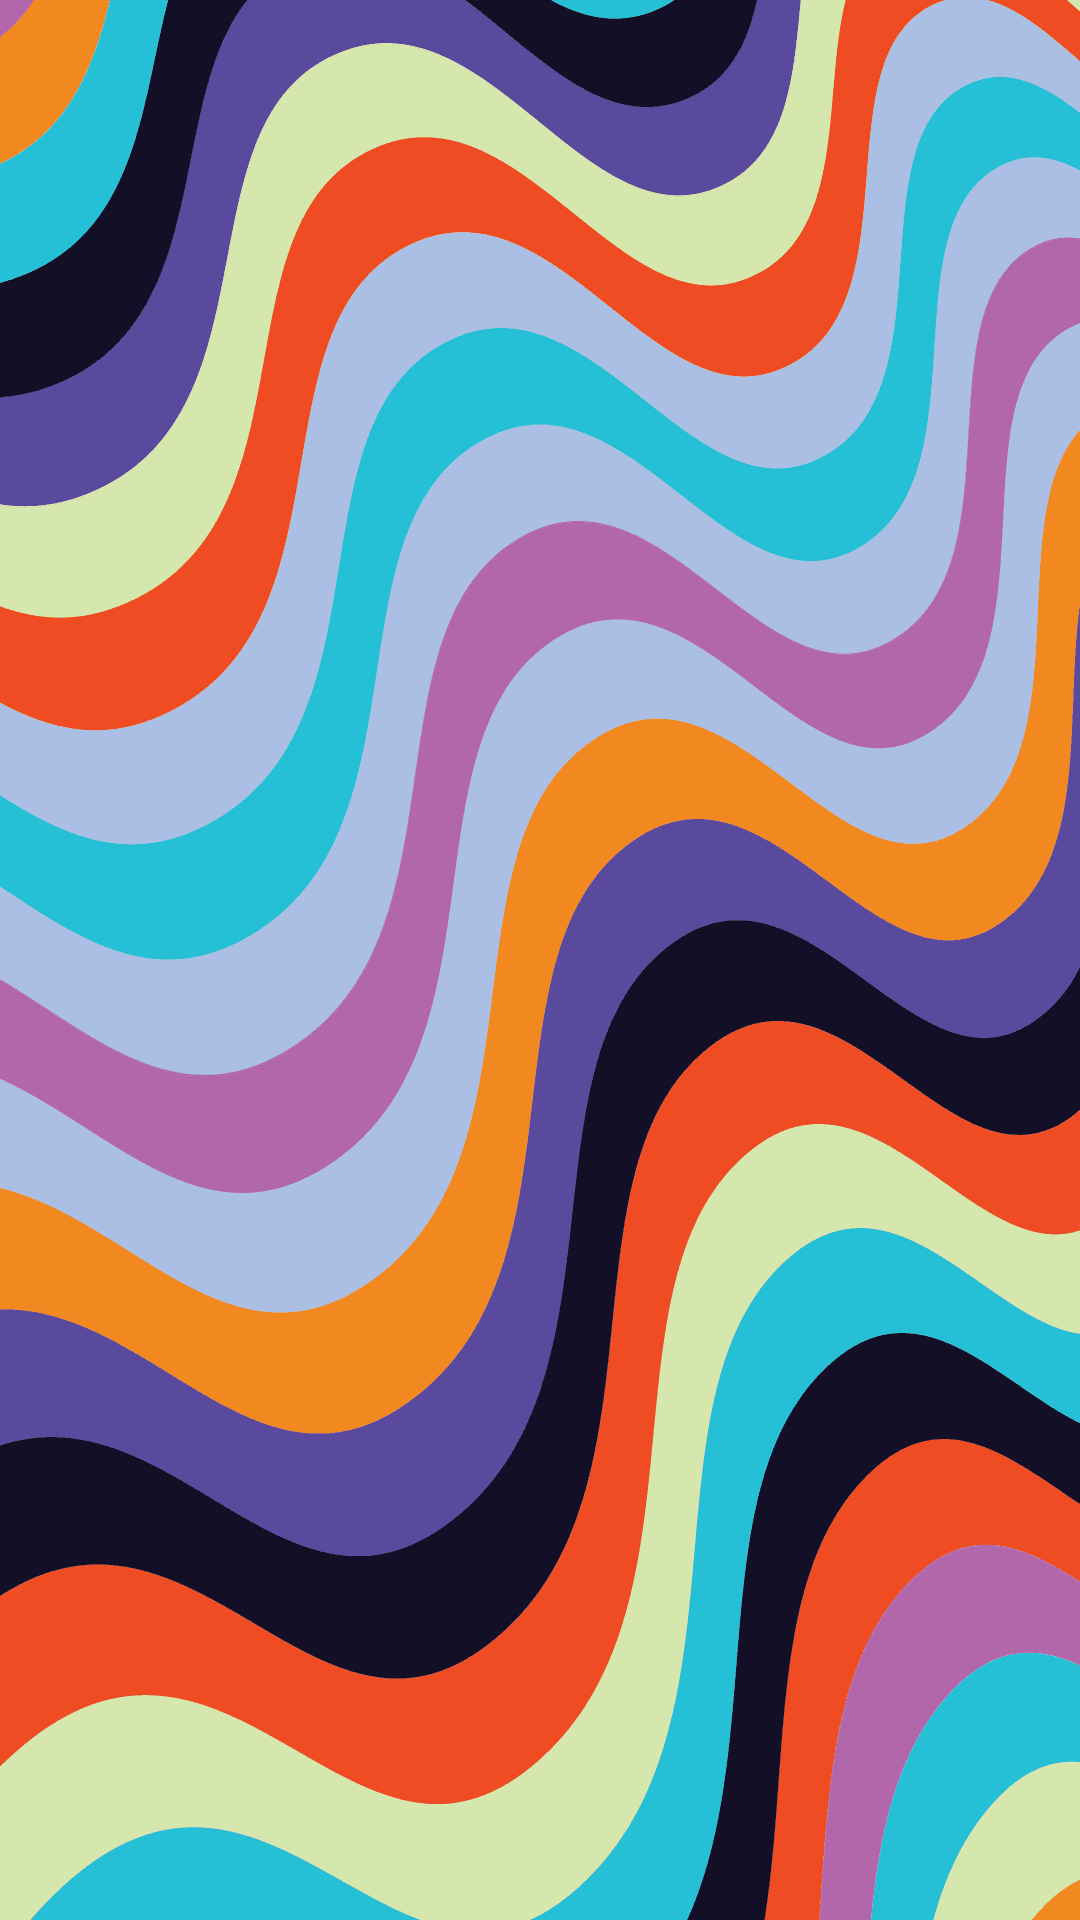 Abstract background with colorful wave patterns